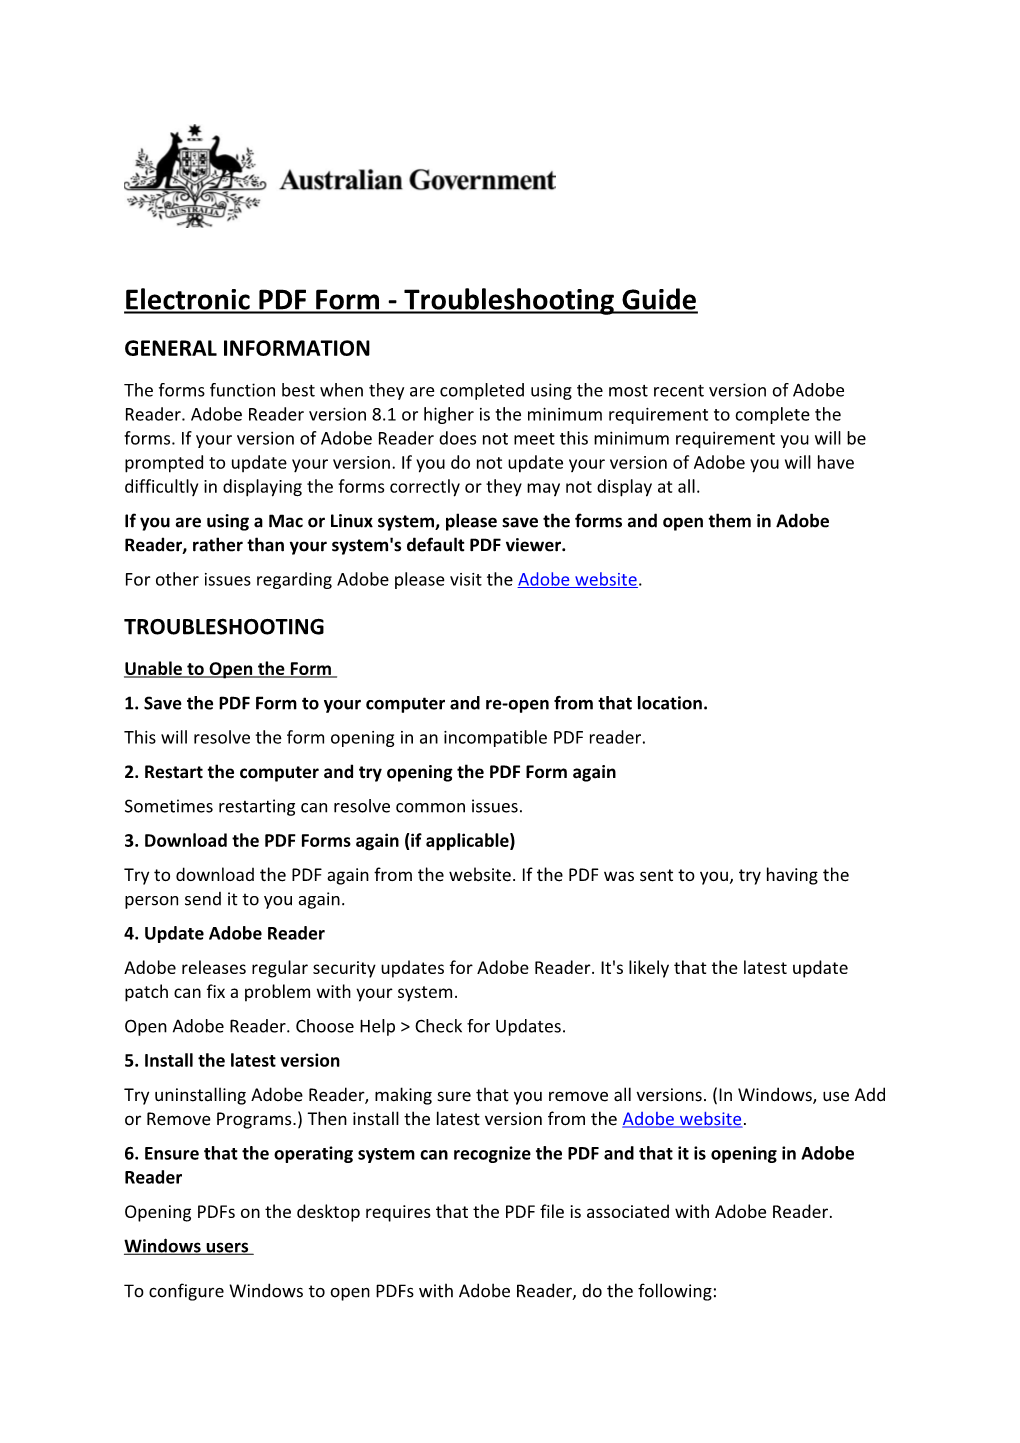 Electronic PDF Form - Troubleshooting Guide